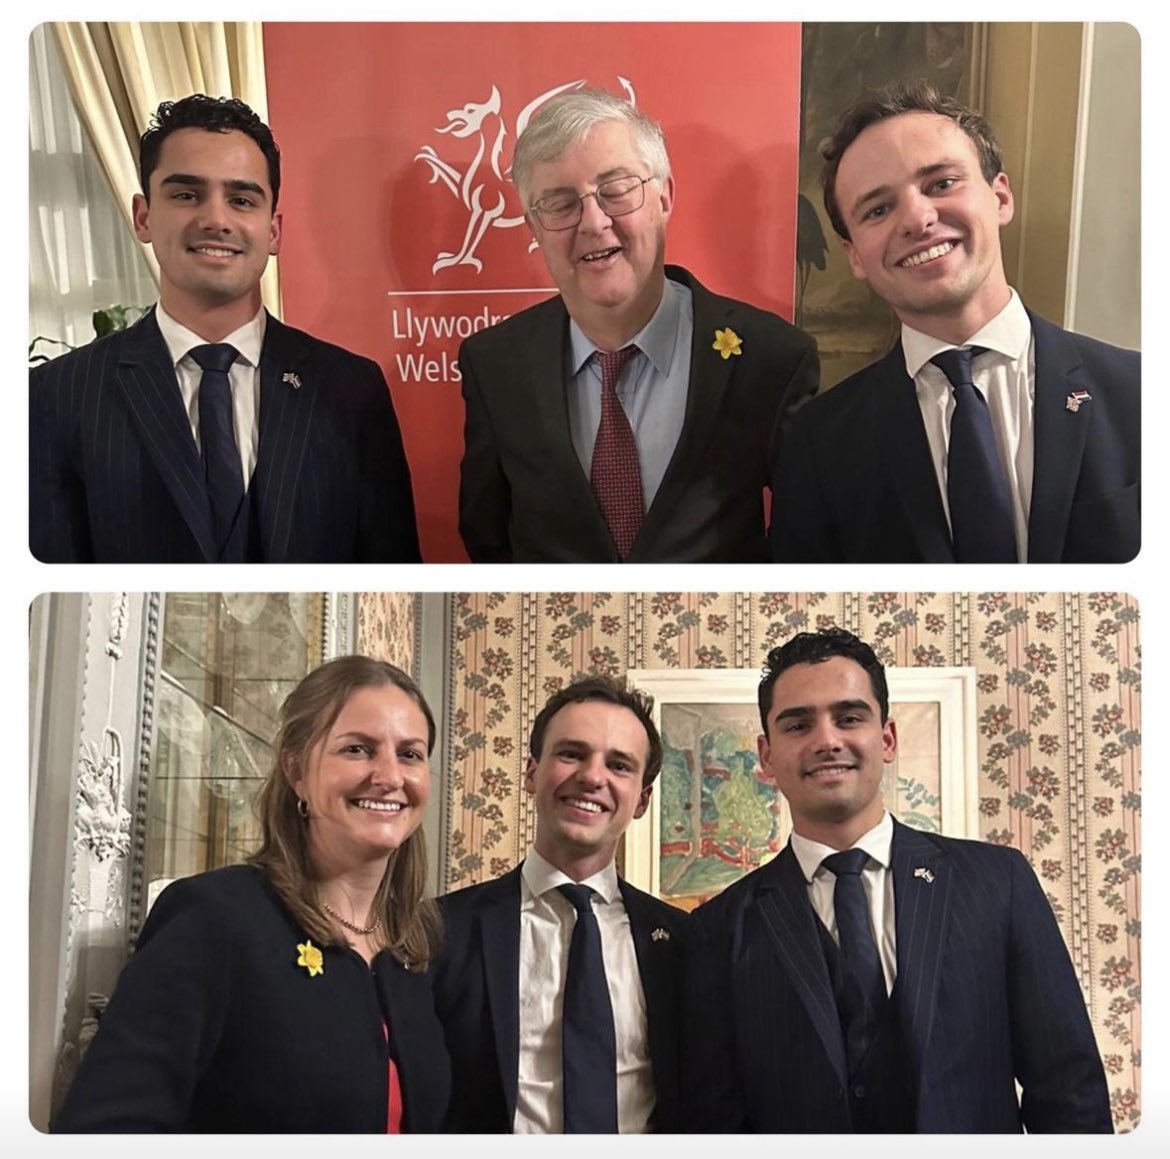 Happy St. David's Day! Dydd Gŵyl Dewi Hapus! 🏴󠁧󠁢󠁷󠁬󠁳󠁿🌼 Our @NBCCnluk colleagues Thomas Wiggers & Giuliano Martin joined at Residence of British Ambassador the St. David’s Day celebrations with First Minister of Wales, Rt Hon @MarkDrakeford. #RandomActsofWelshness #WeAreNBCC